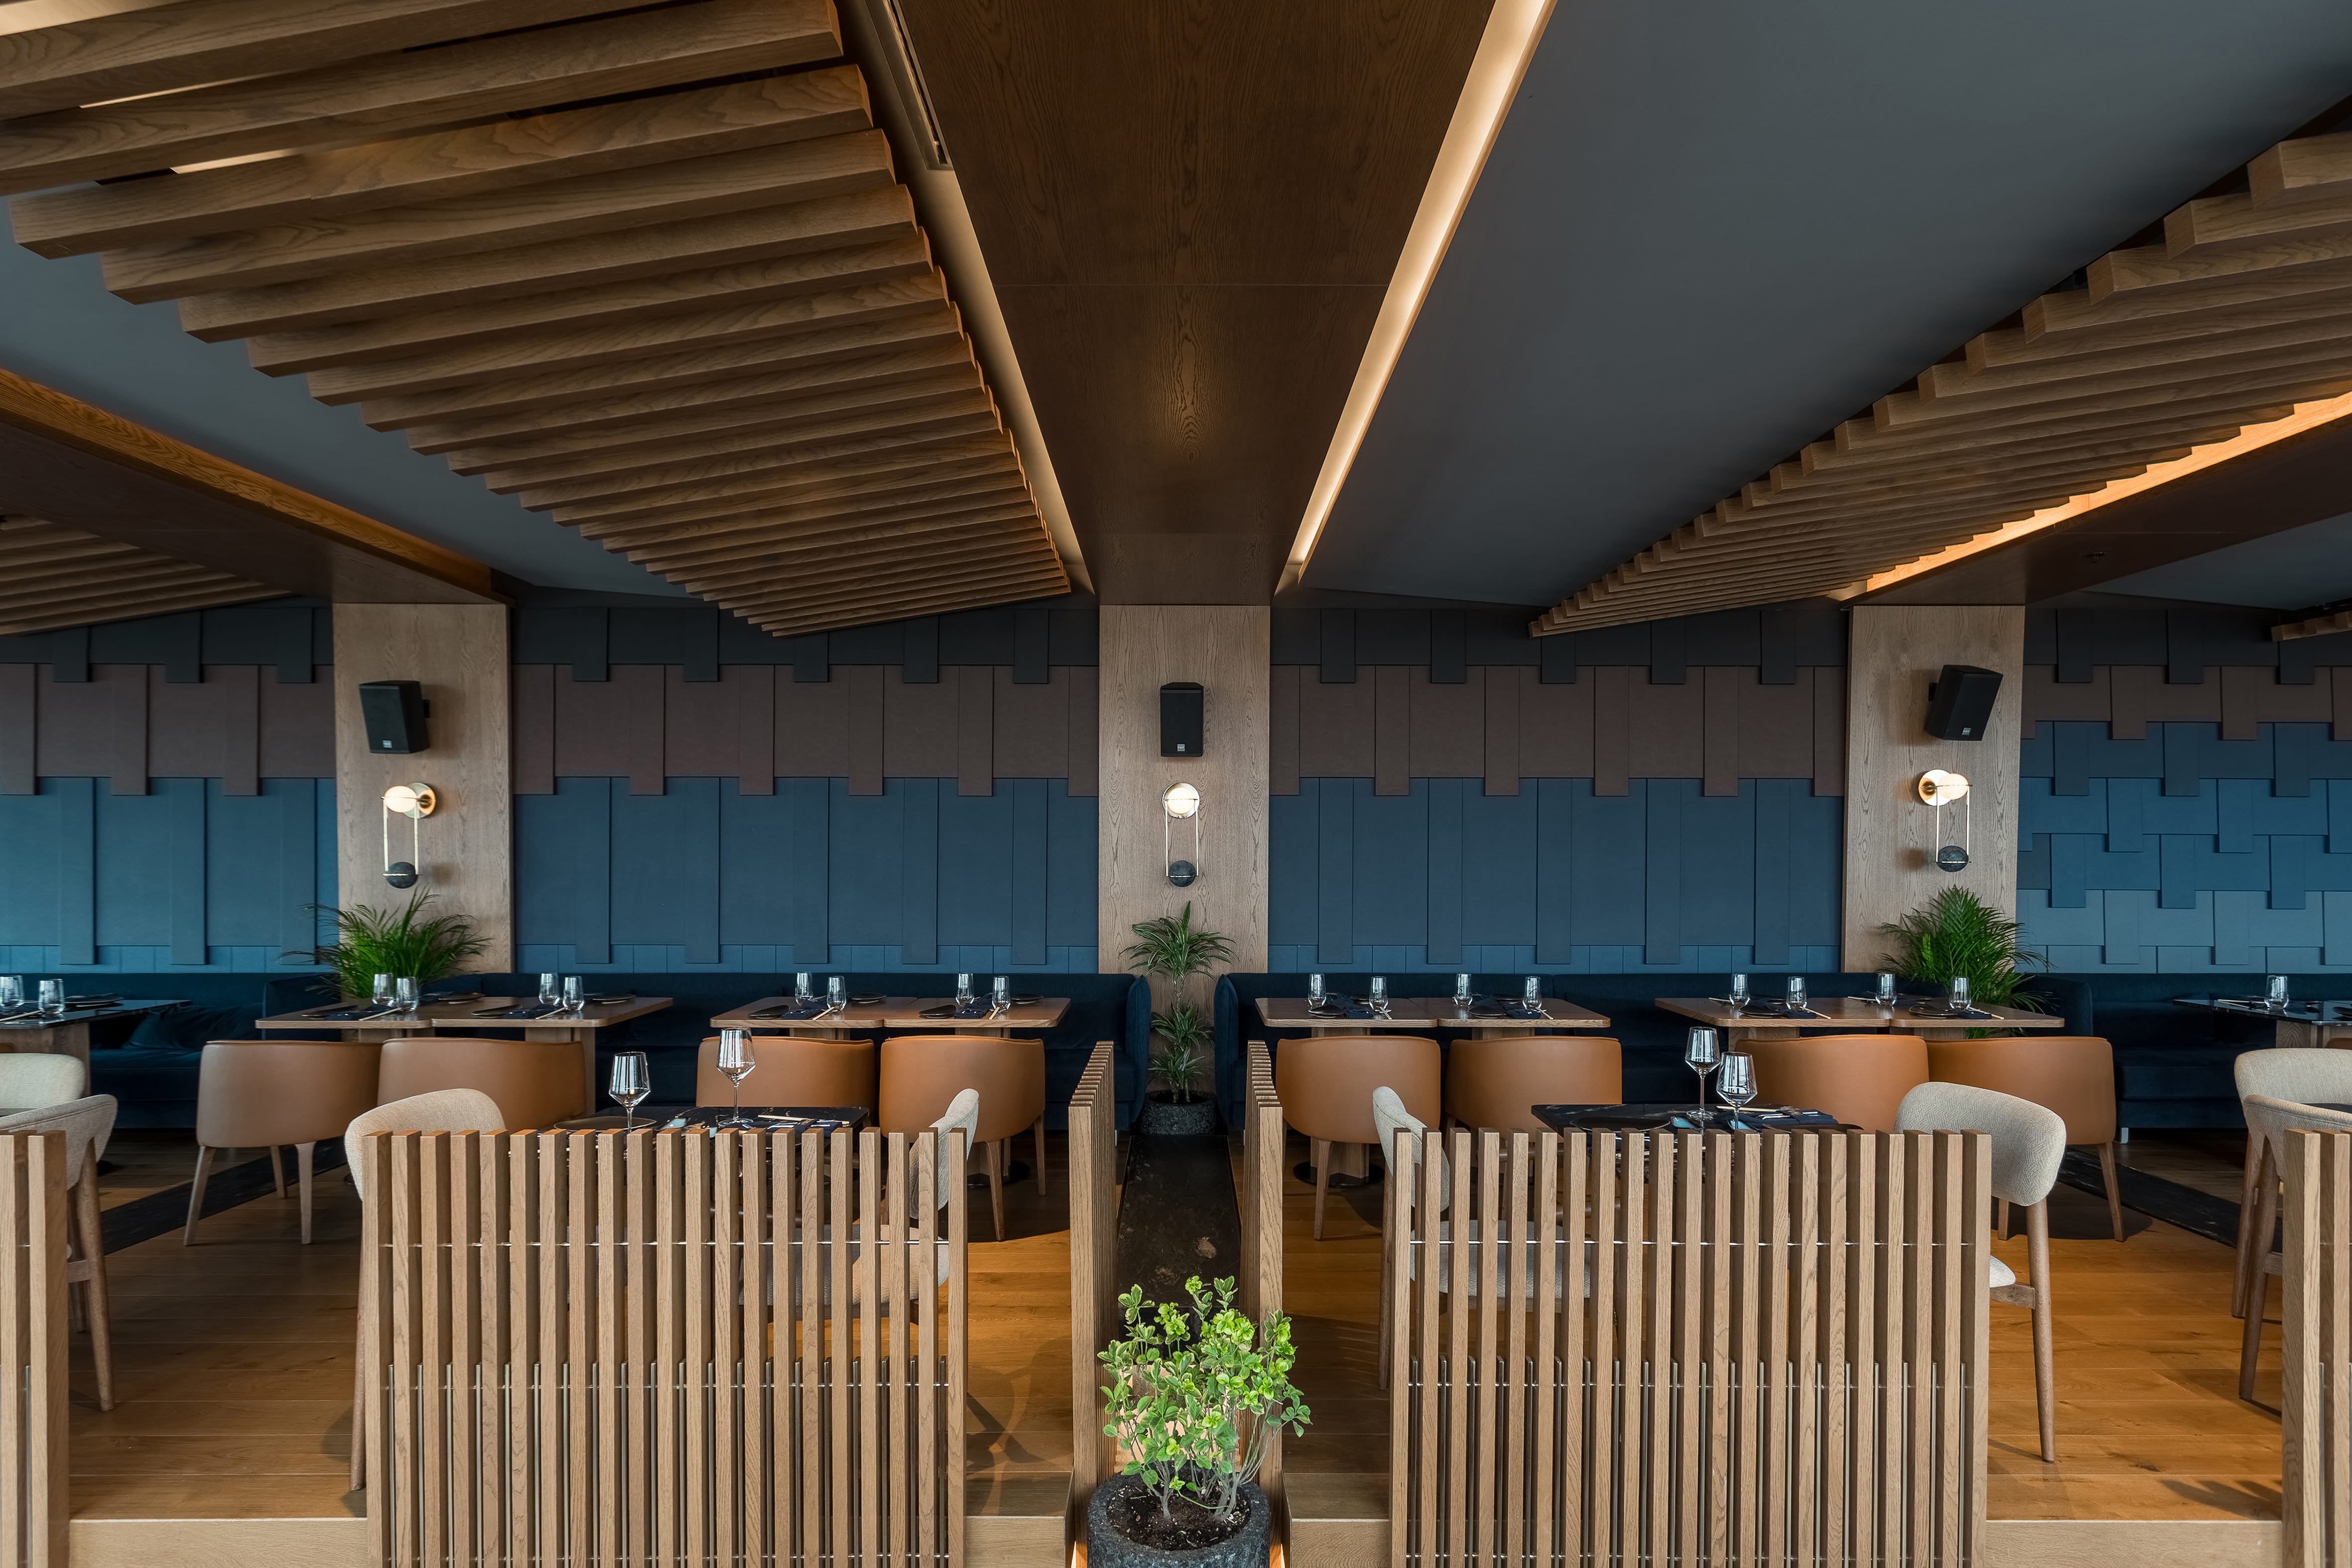 iwa - Restaurant interior has details inspired from the concept of “rock” and Shinto shrines